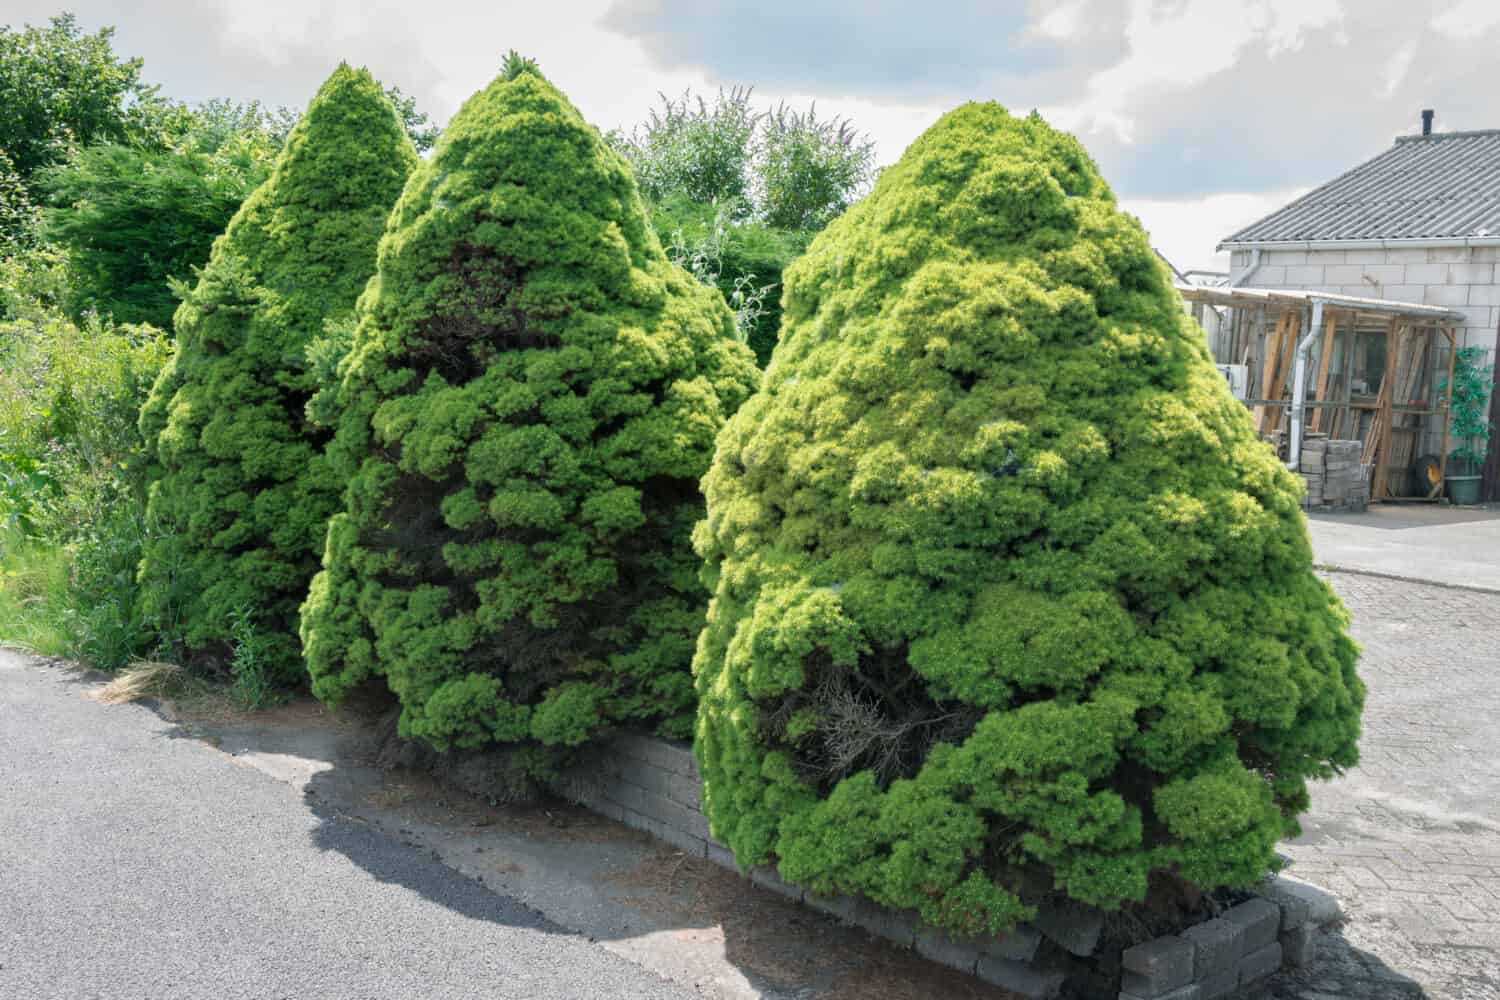 Three spruce with dense foliage that resemble dwarfs. Tree's name is Dwarf Alberta Spruce or Picea glauca 'Conica'.